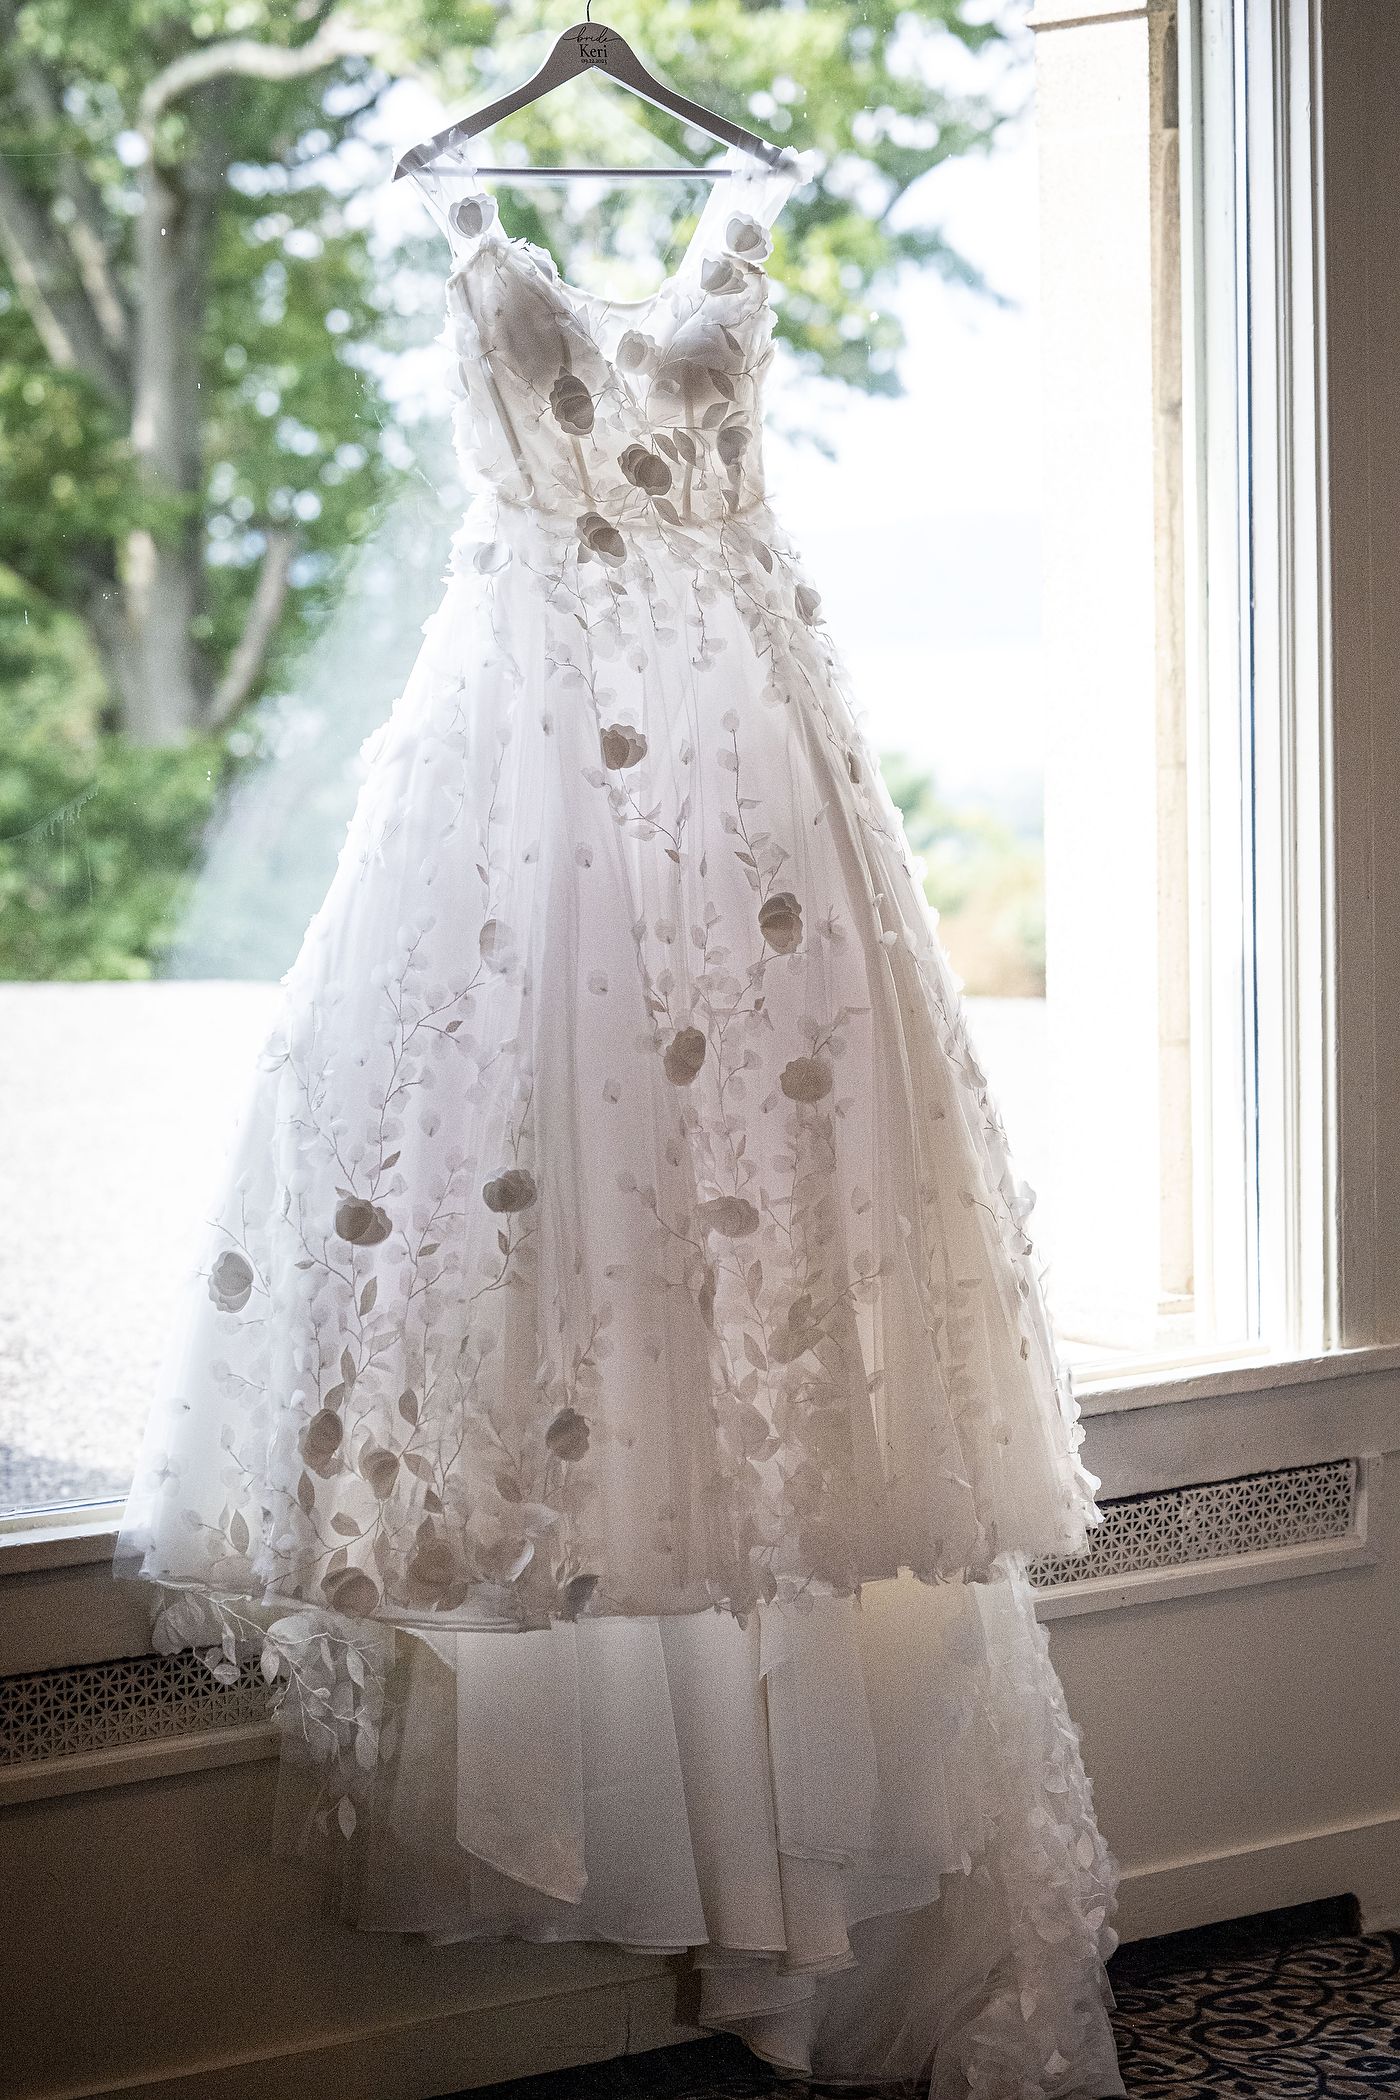 Lace Wedding Gown In The Window